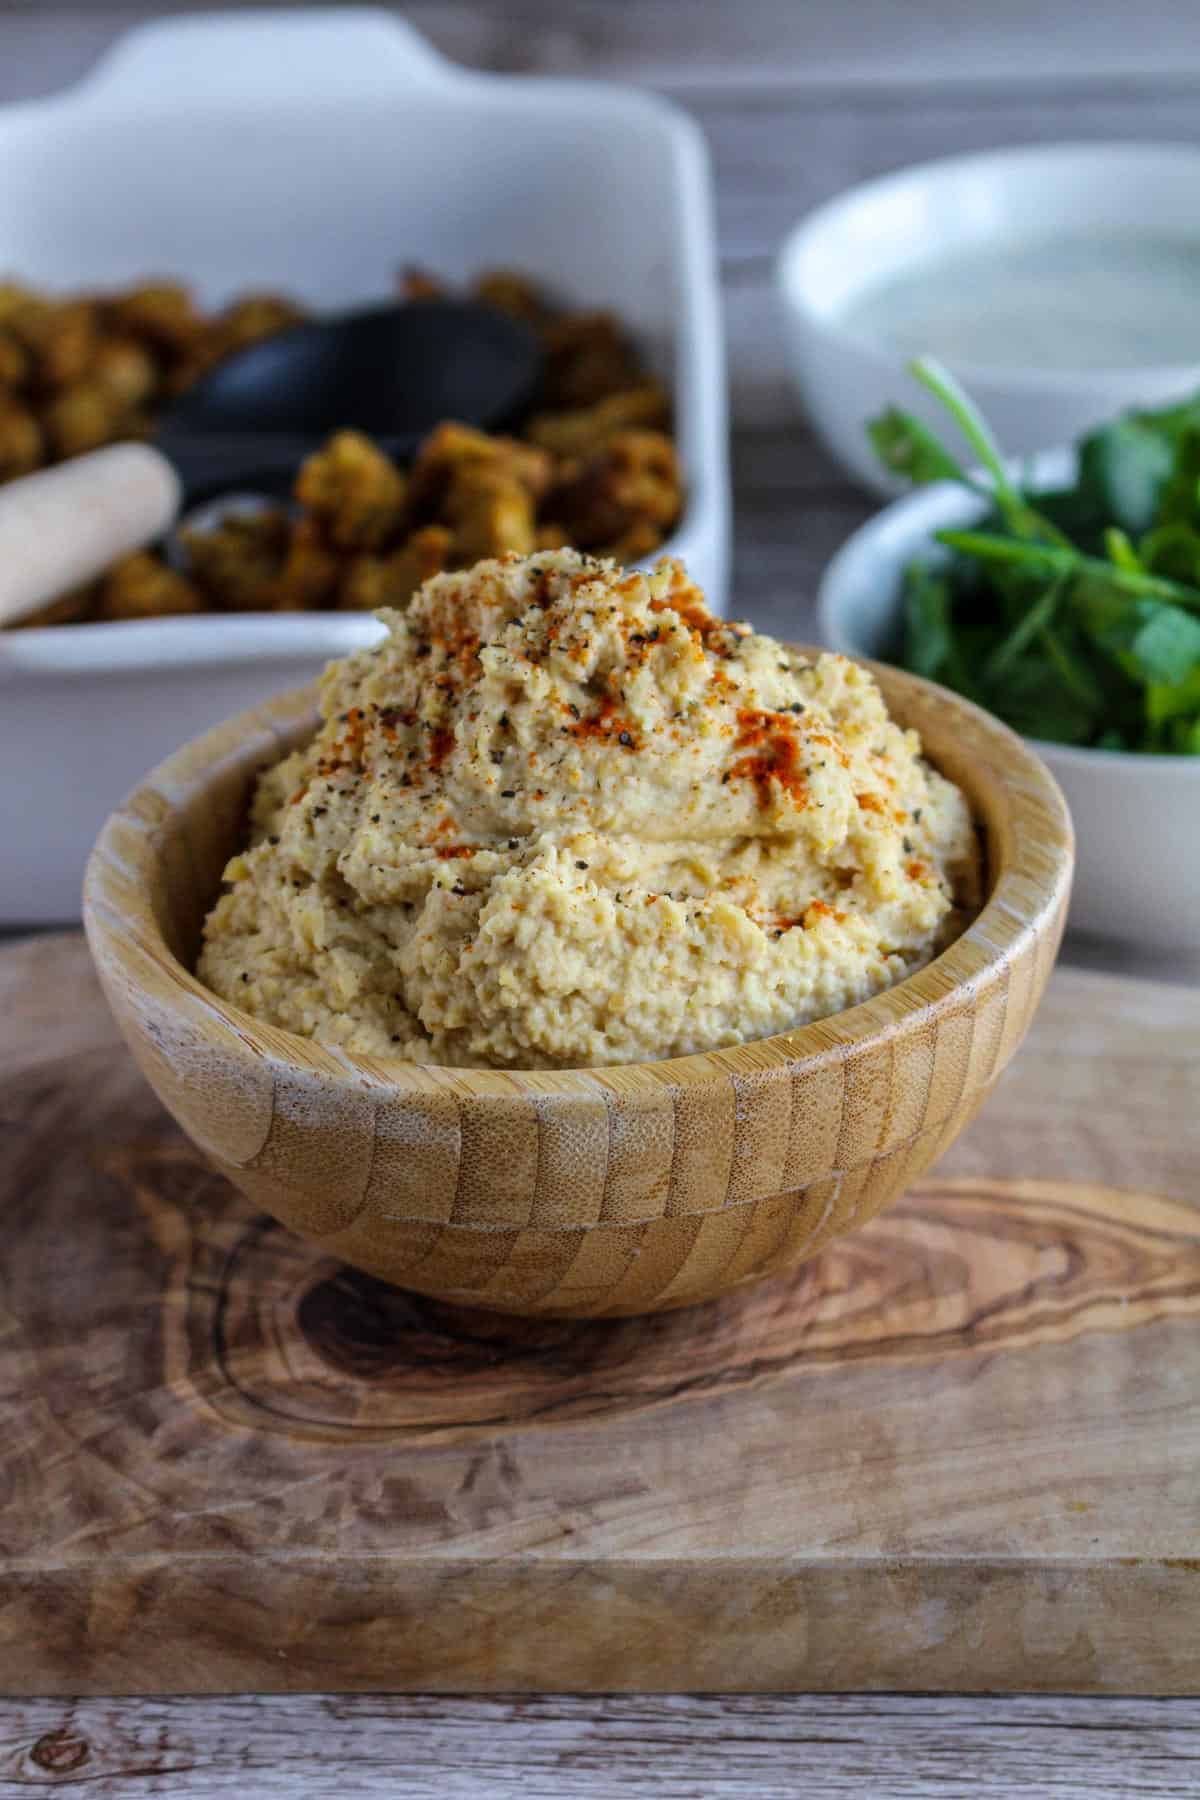 Creamy Hummus Recipe Without Garlic in a bowl.